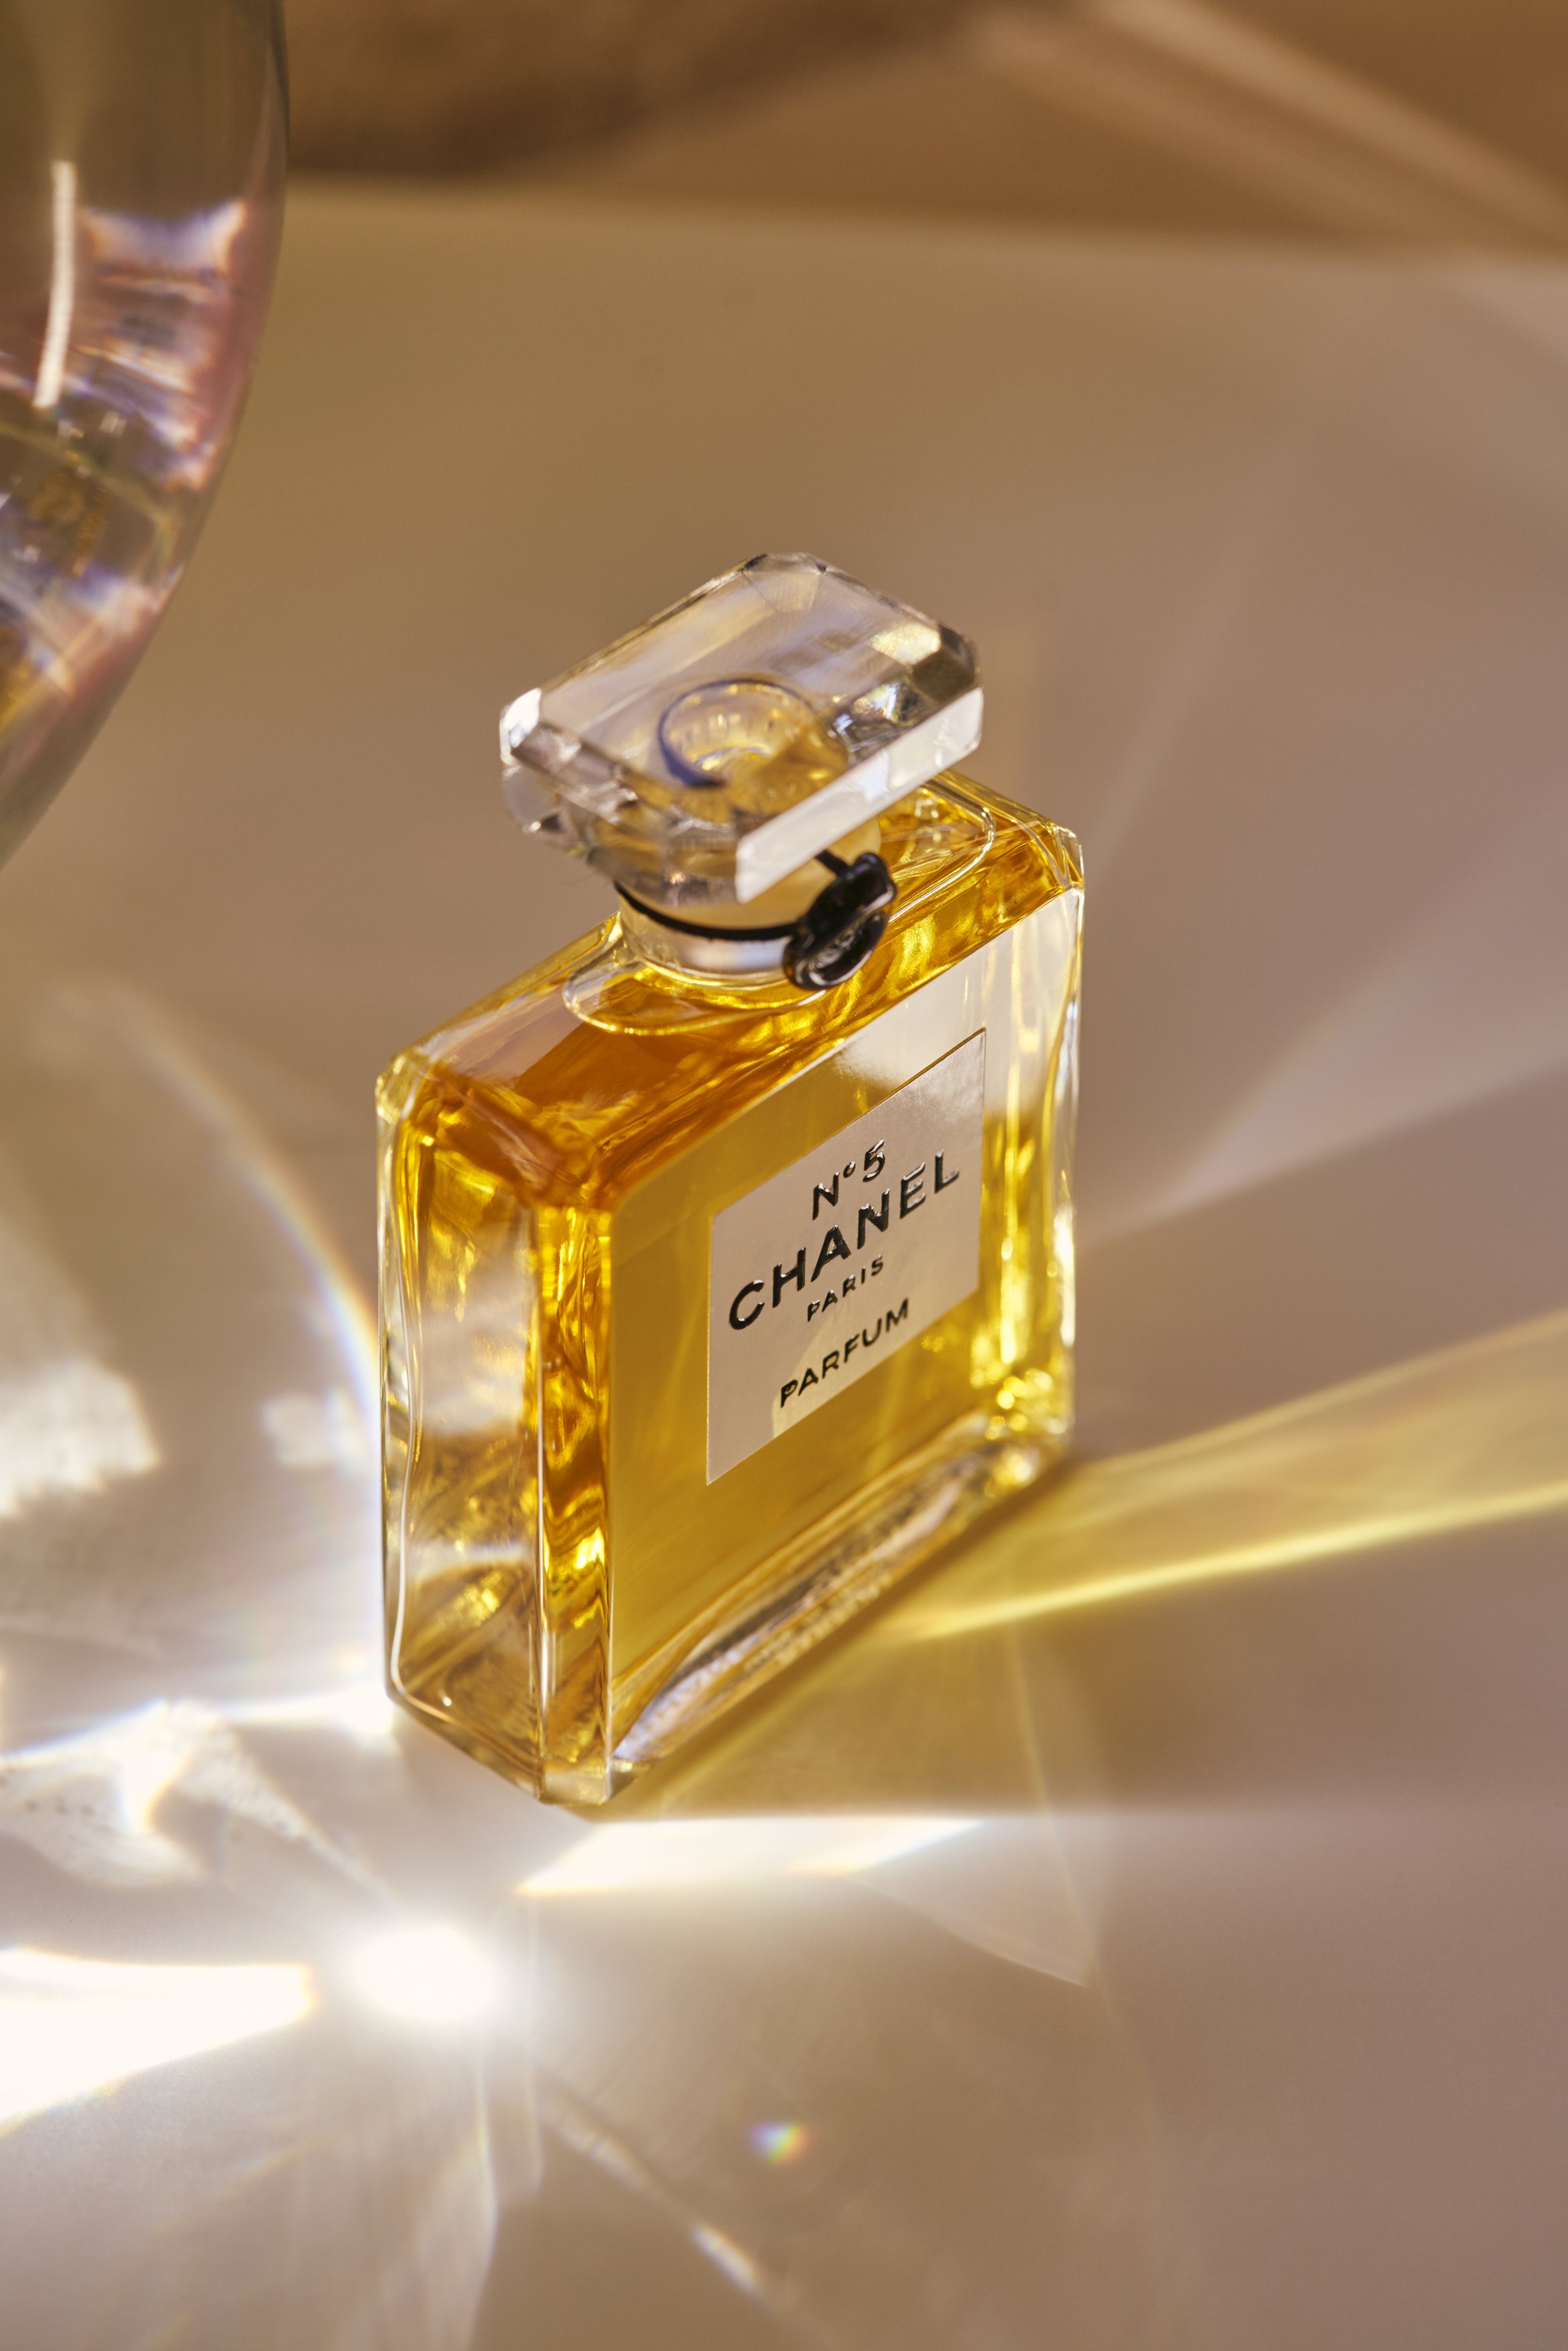 Chanel No. 5: This is why Chanel No. 5 is the world's most-iconic perfume